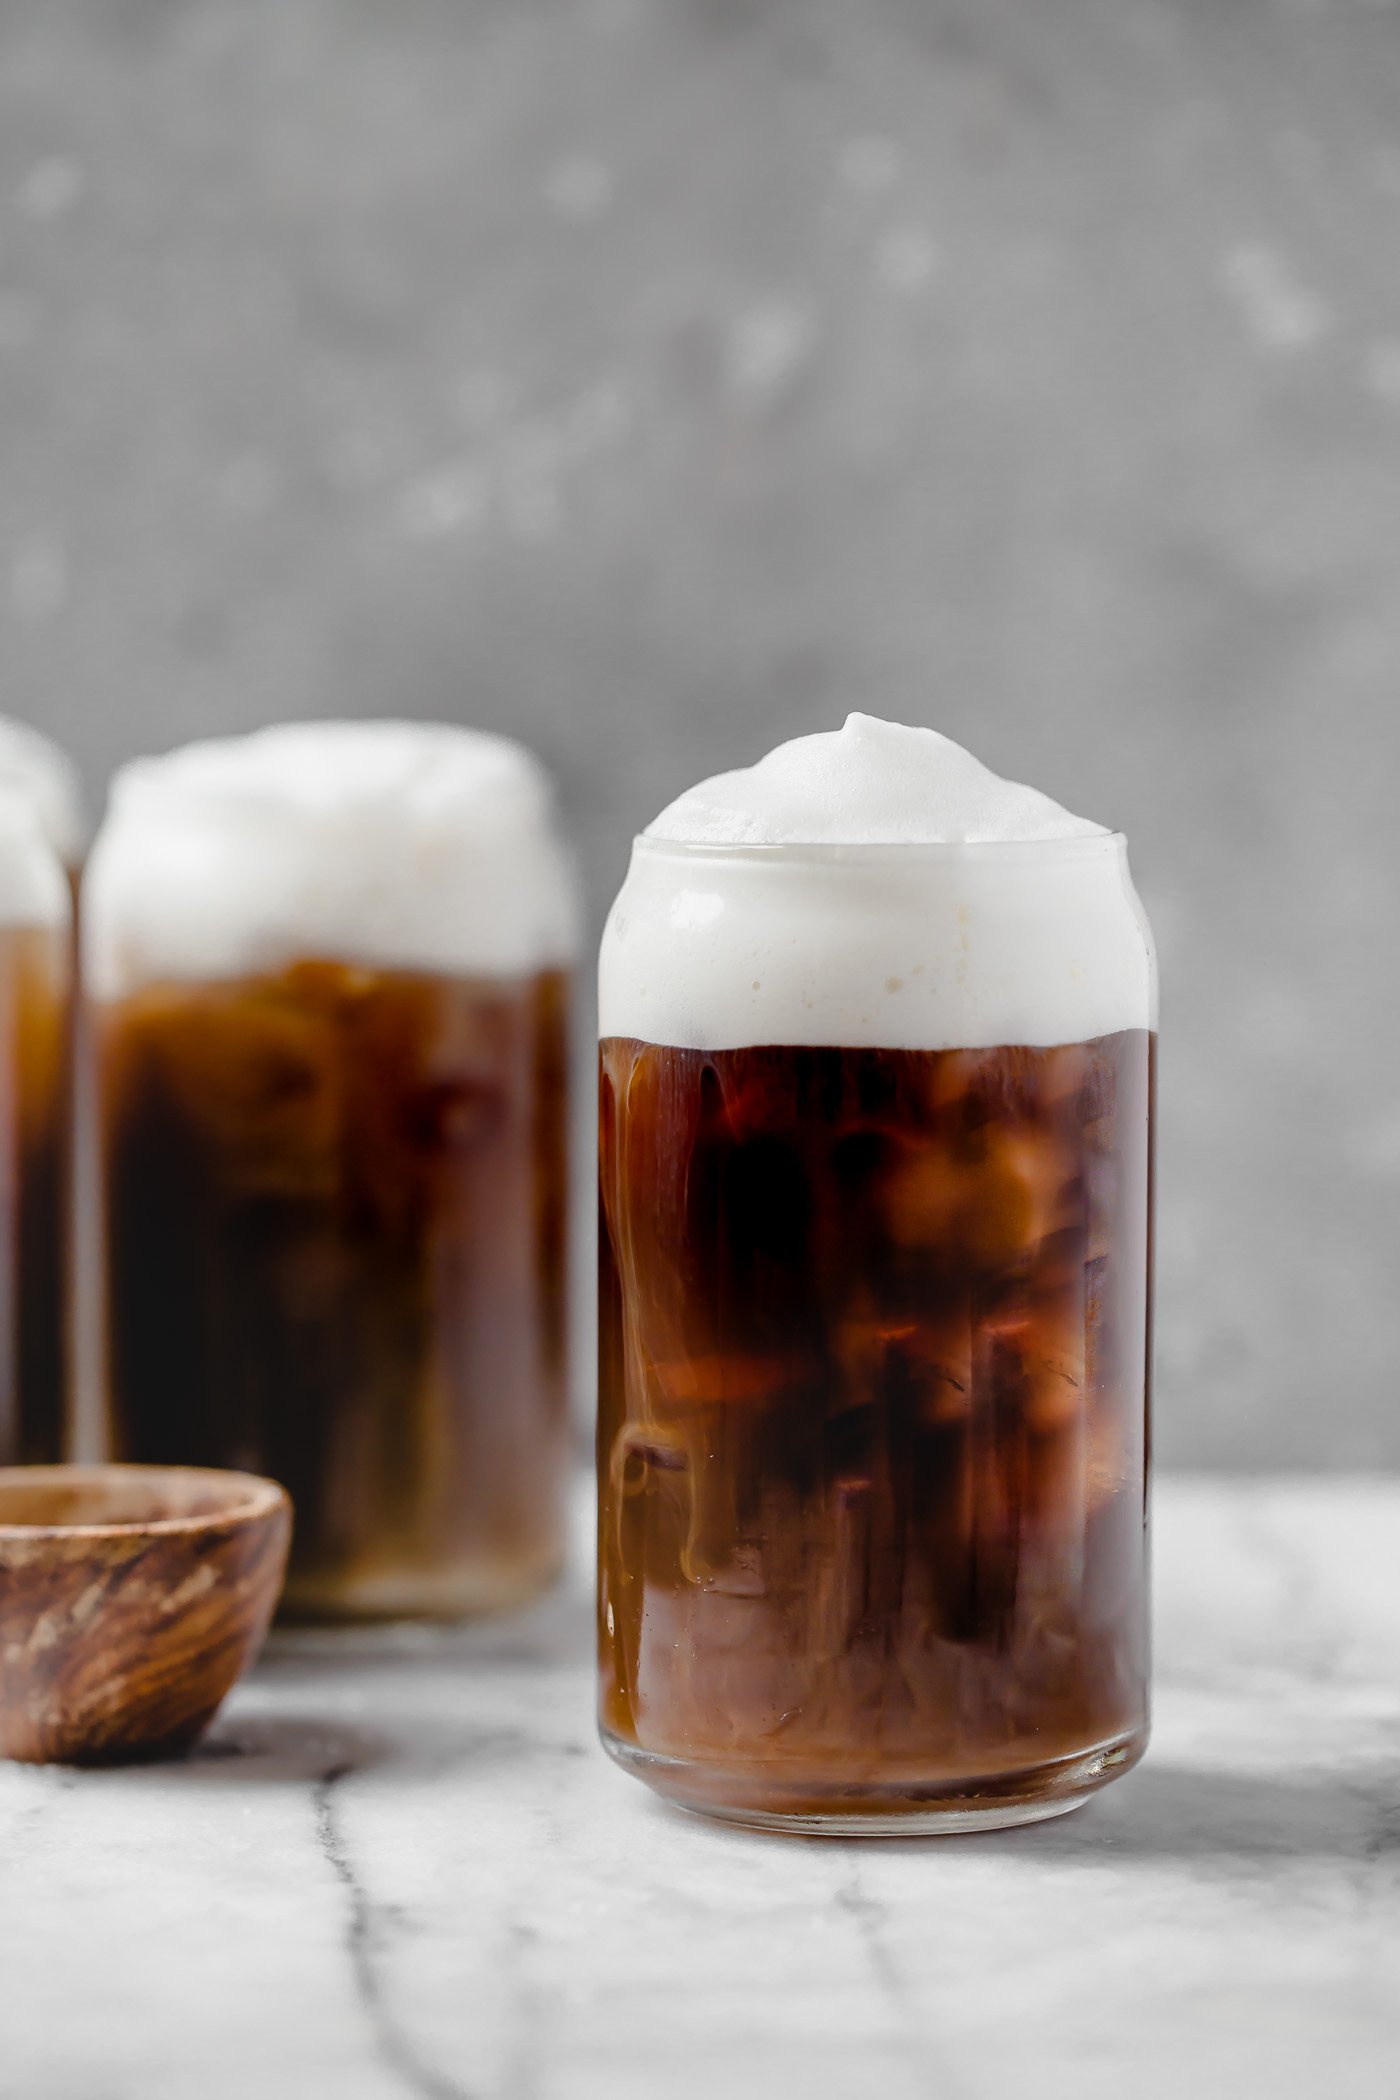 an easy & natural recipe for homemade starbucks salted cream cold foam cold brew with only 4-ingredients! cold brew coffee, lightly sweetened with maple syrup, topped with a creamy salty-sweet cold foam, this salted cream cold foam cold brew coffee is the perfect salty-sweet coffee drink! #playswellwithbutter #saltedcreamcoldfoamcoldbrewcoffee #coldbrew #coldbrewcoffeerecipe #icedcoffee #easycoffeerecipe #starbucksdrinks #starbucksrecipe